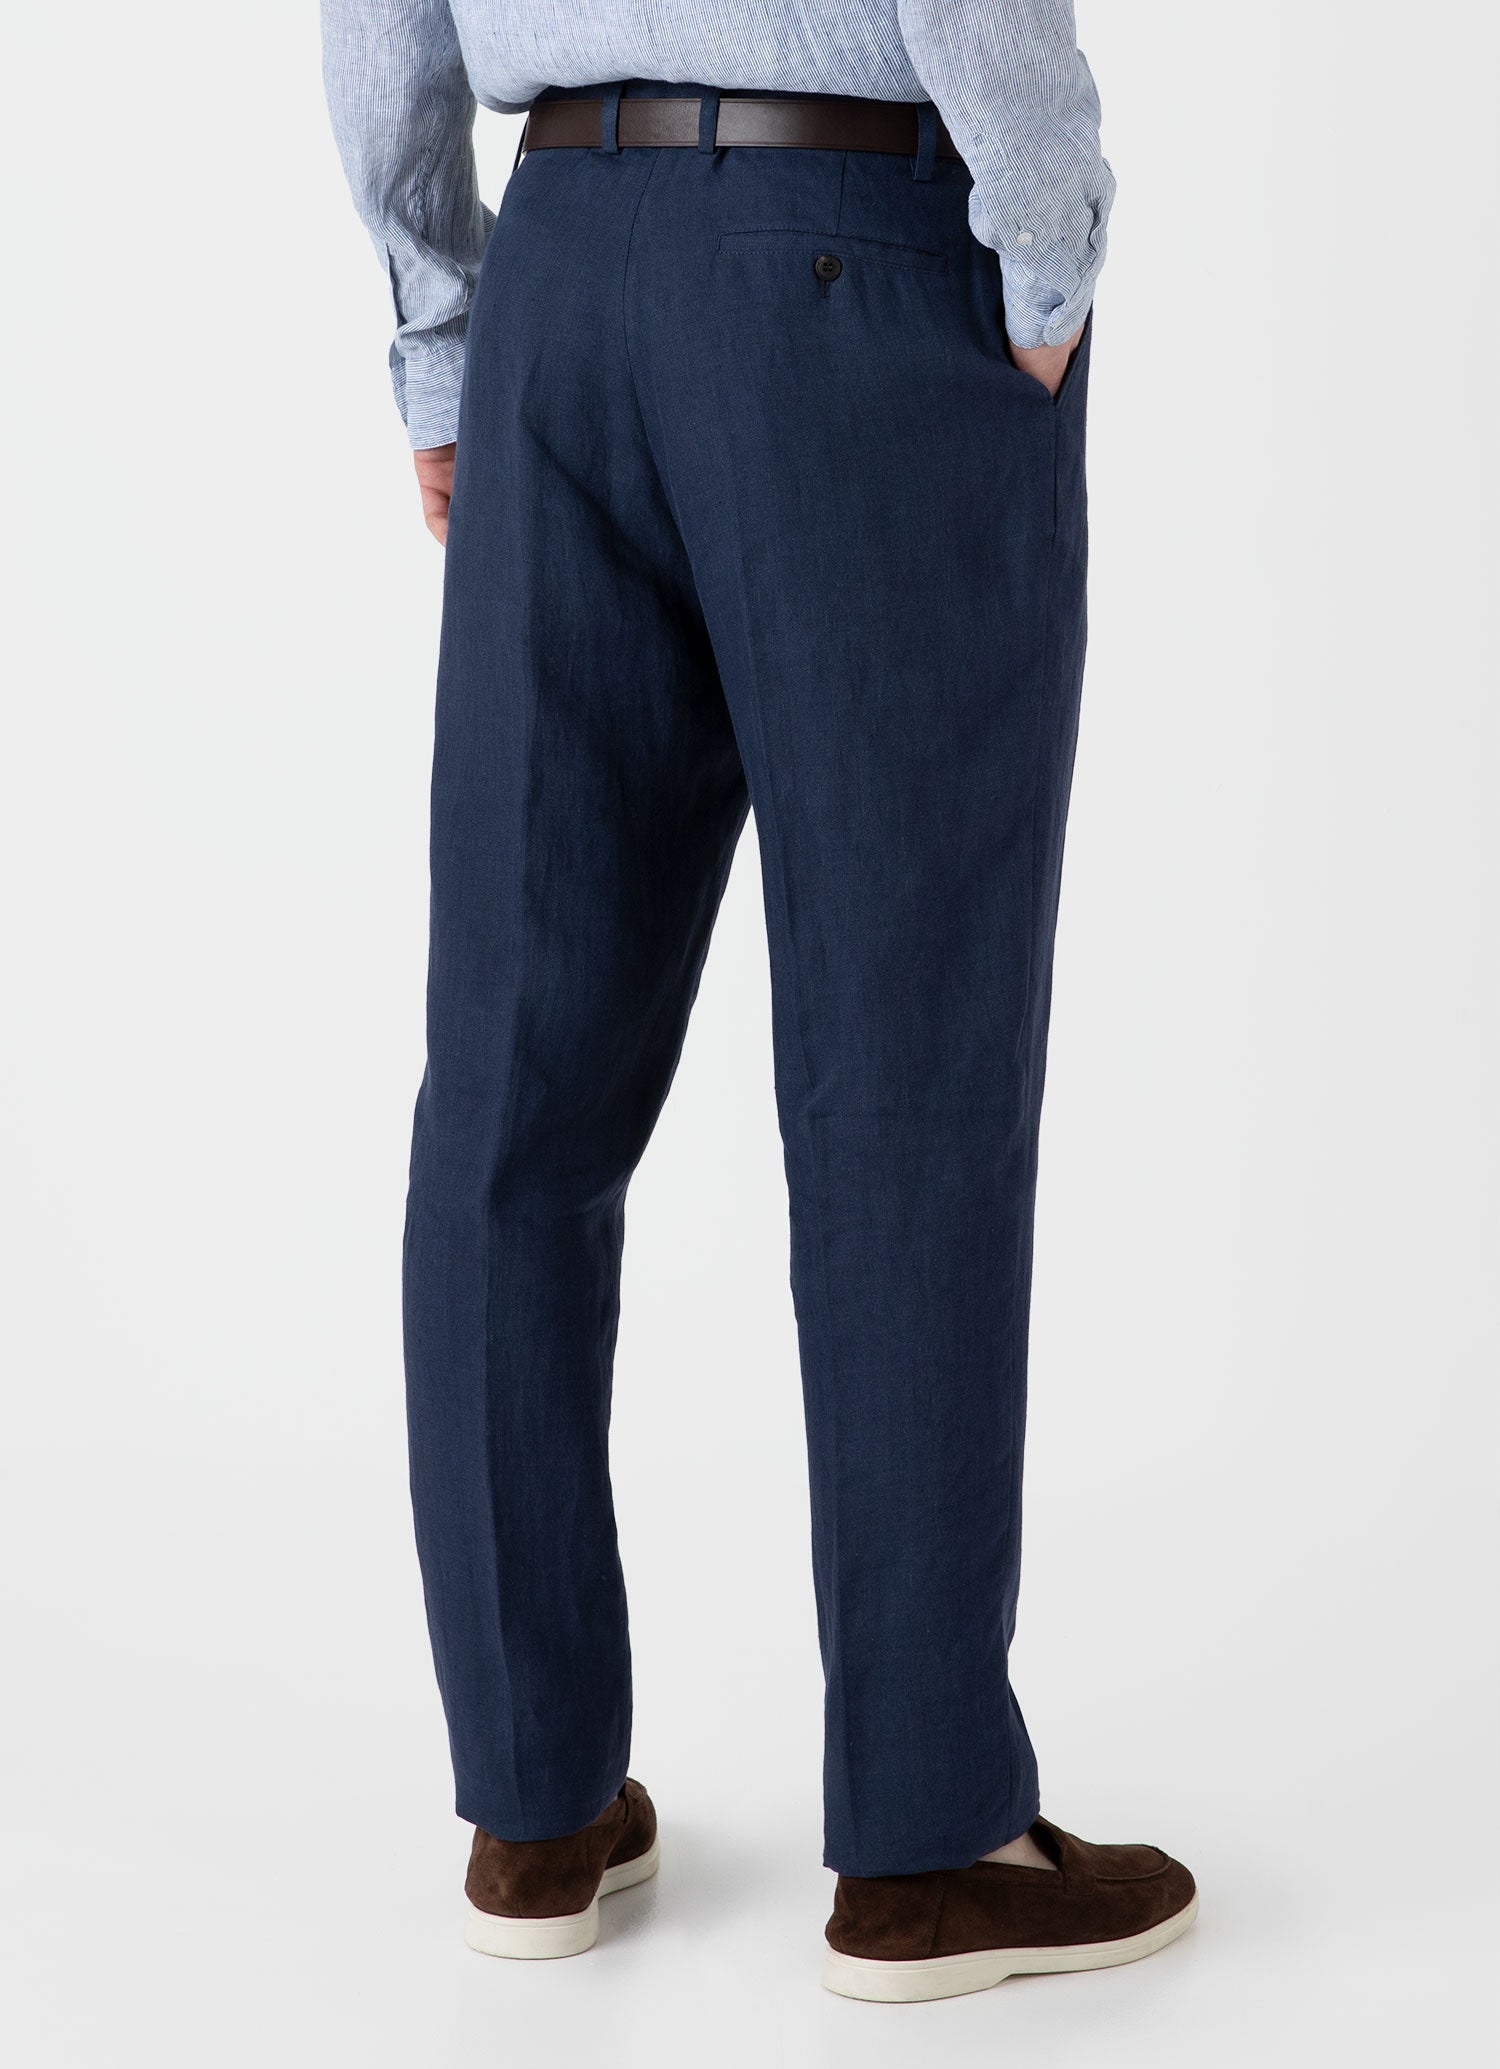 O'Connell's pleated front cotton Moleskin Trouser - Navy - Men's Clothing,  Traditional Natural shouldered clothing, preppy apparel